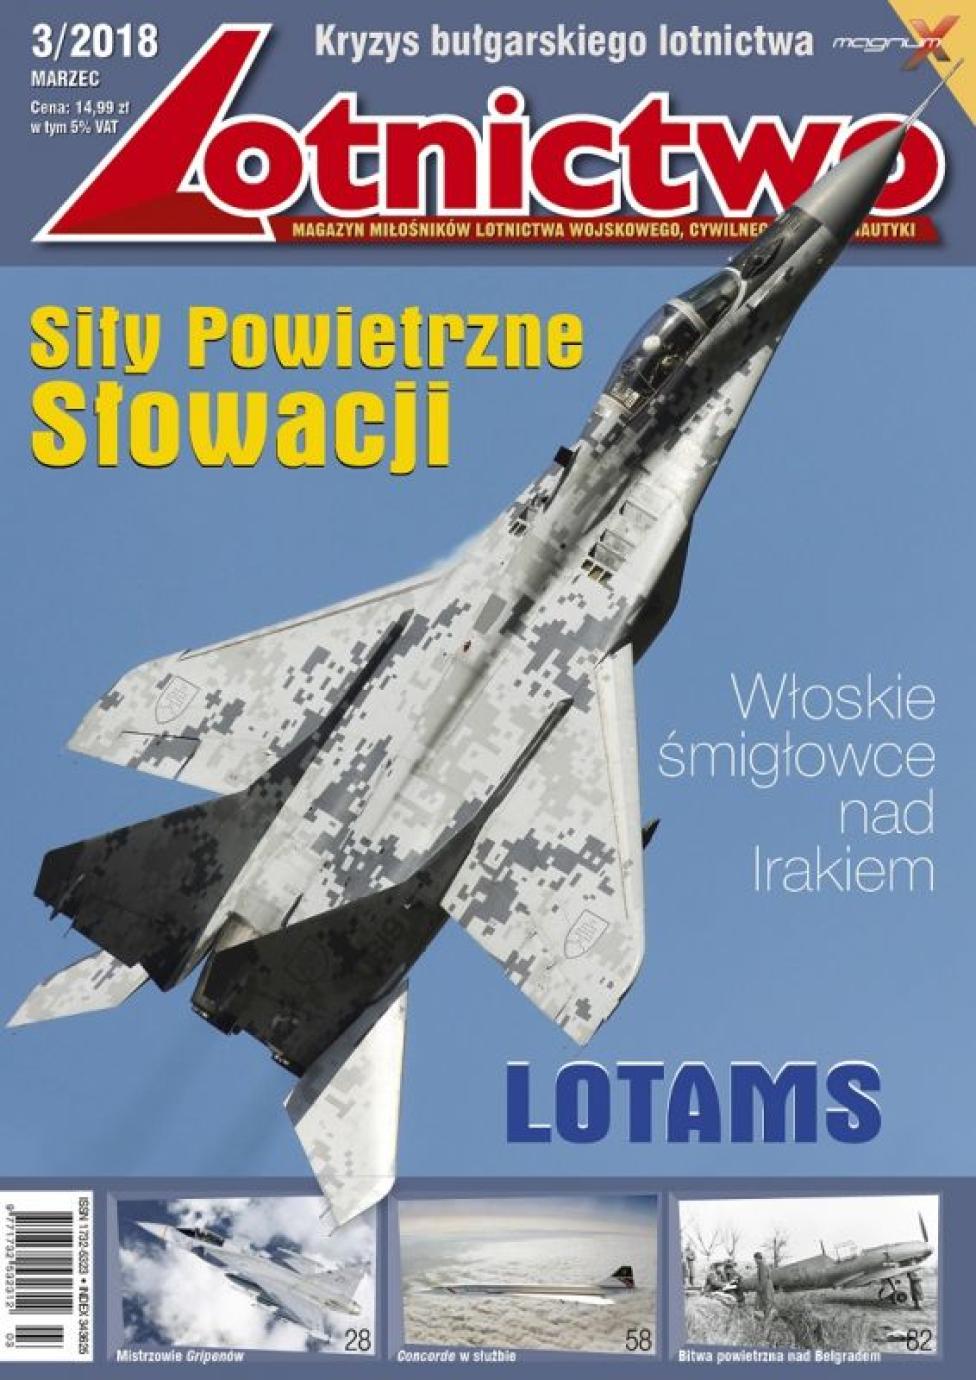 Lotnictwo 3/2018